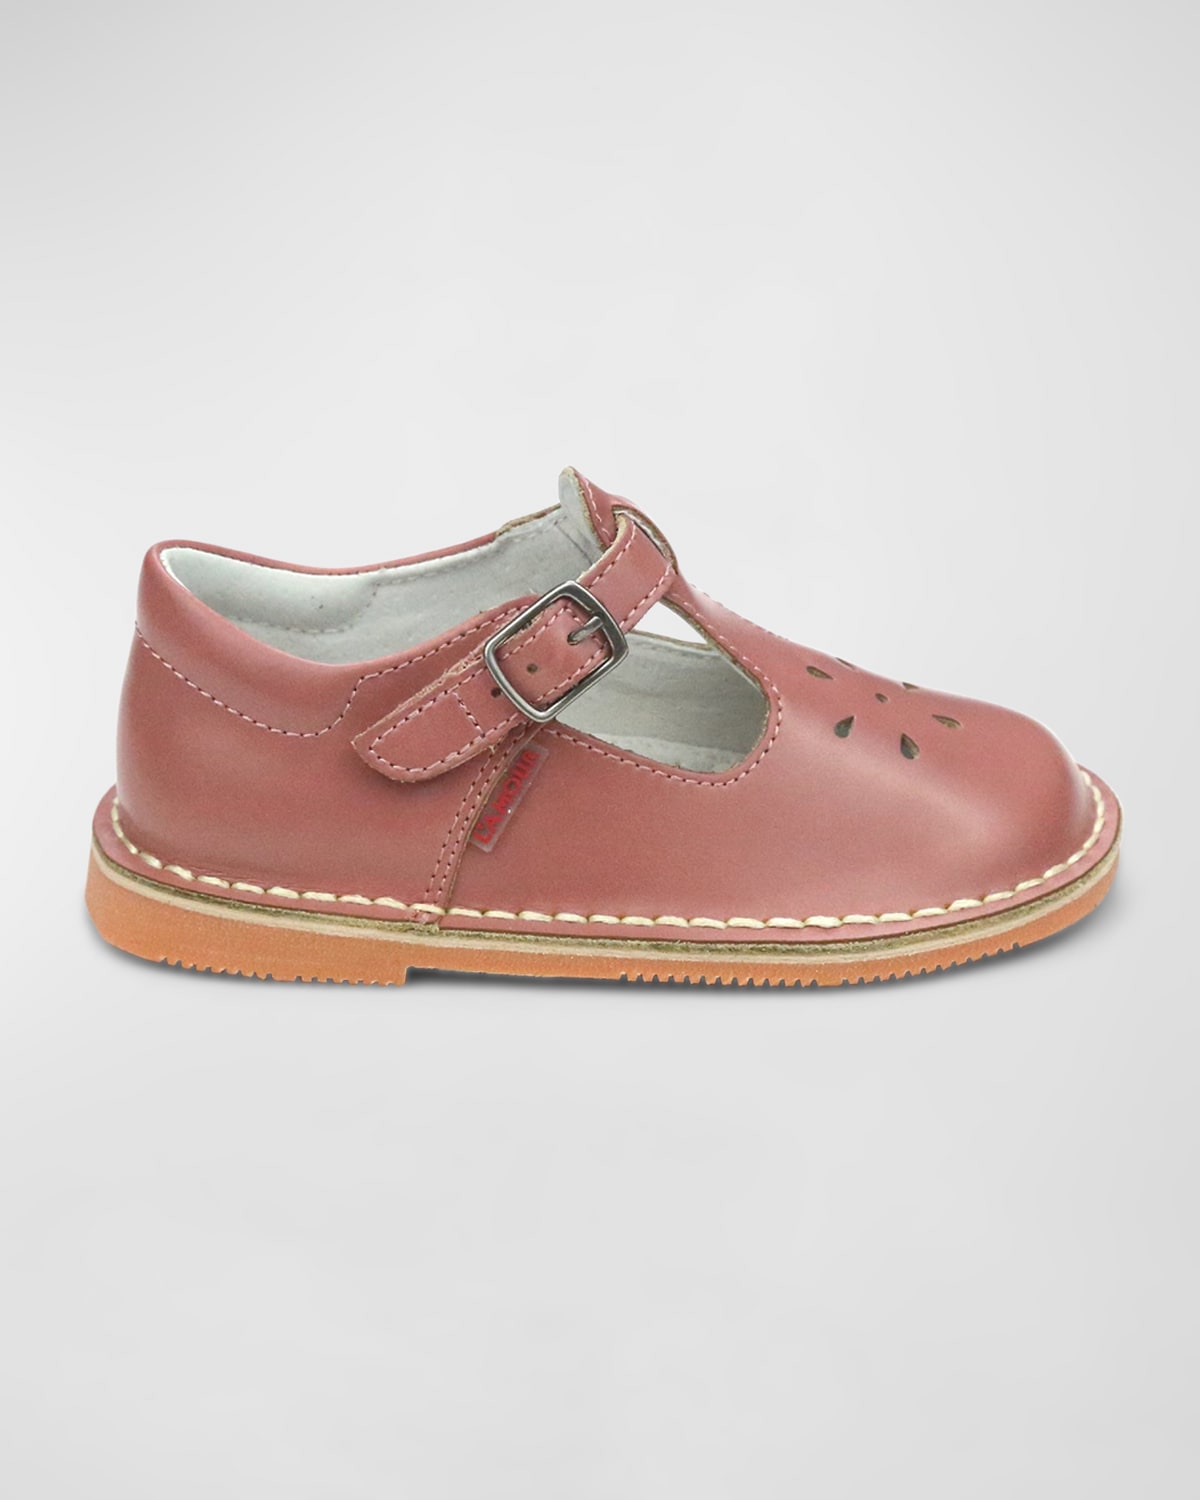 L'amour Shoes Girl's Joy Leather Cutout T-strap Mary Jane, Baby/toddler/kids In Rose